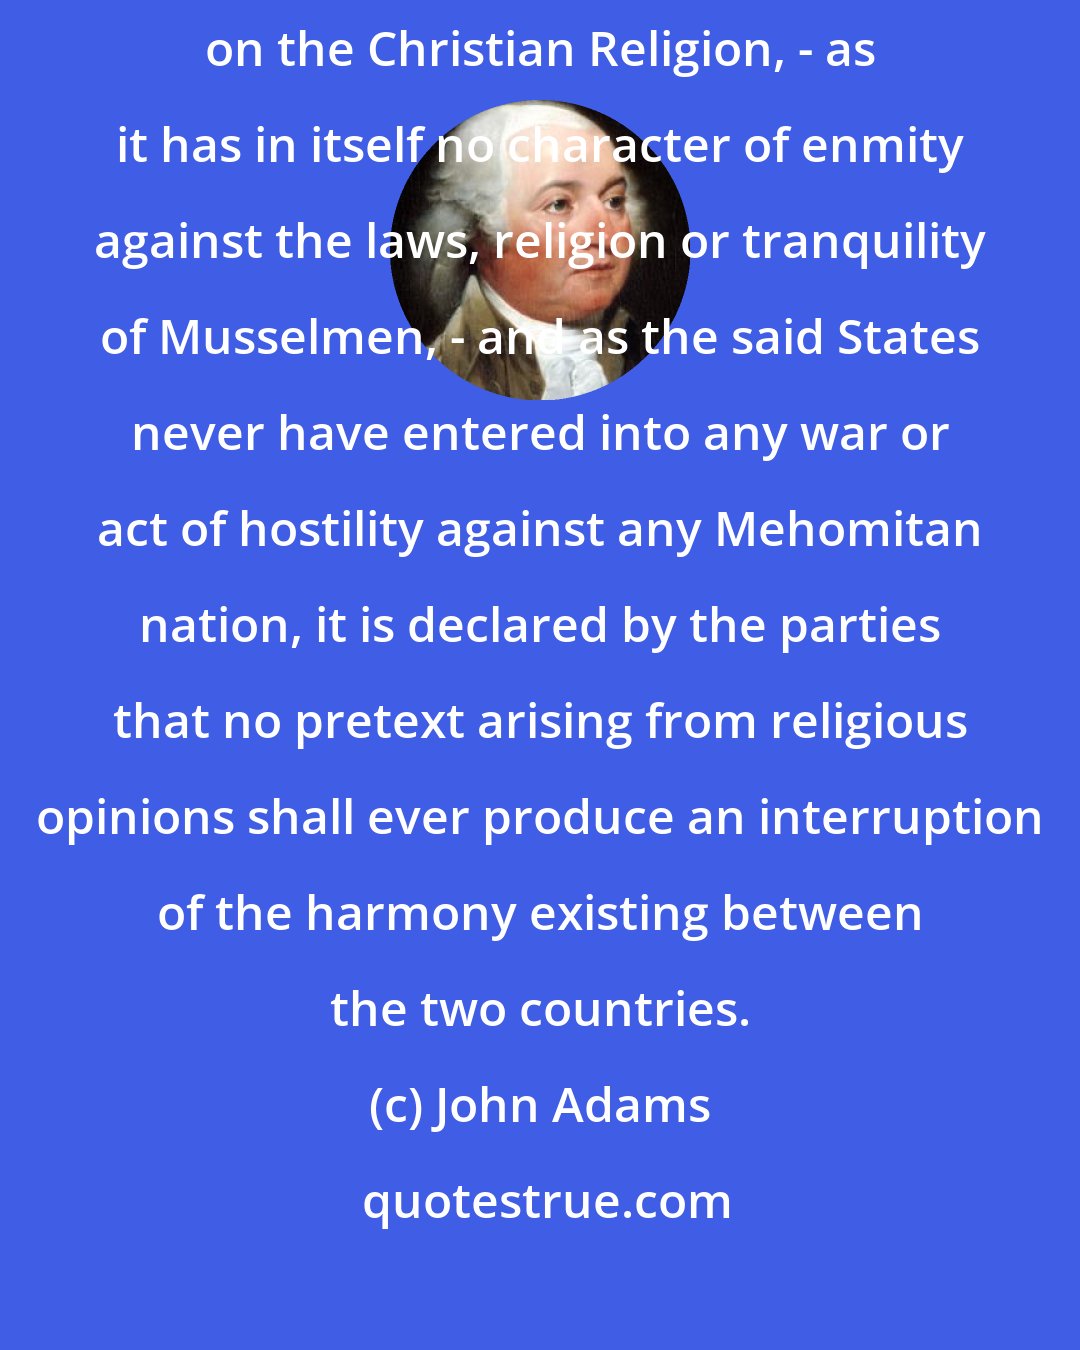 John Adams: As the government of the United States of America is not in any sense founded on the Christian Religion, - as it has in itself no character of enmity against the laws, religion or tranquility of Musselmen, - and as the said States never have entered into any war or act of hostility against any Mehomitan nation, it is declared by the parties that no pretext arising from religious opinions shall ever produce an interruption of the harmony existing between the two countries.